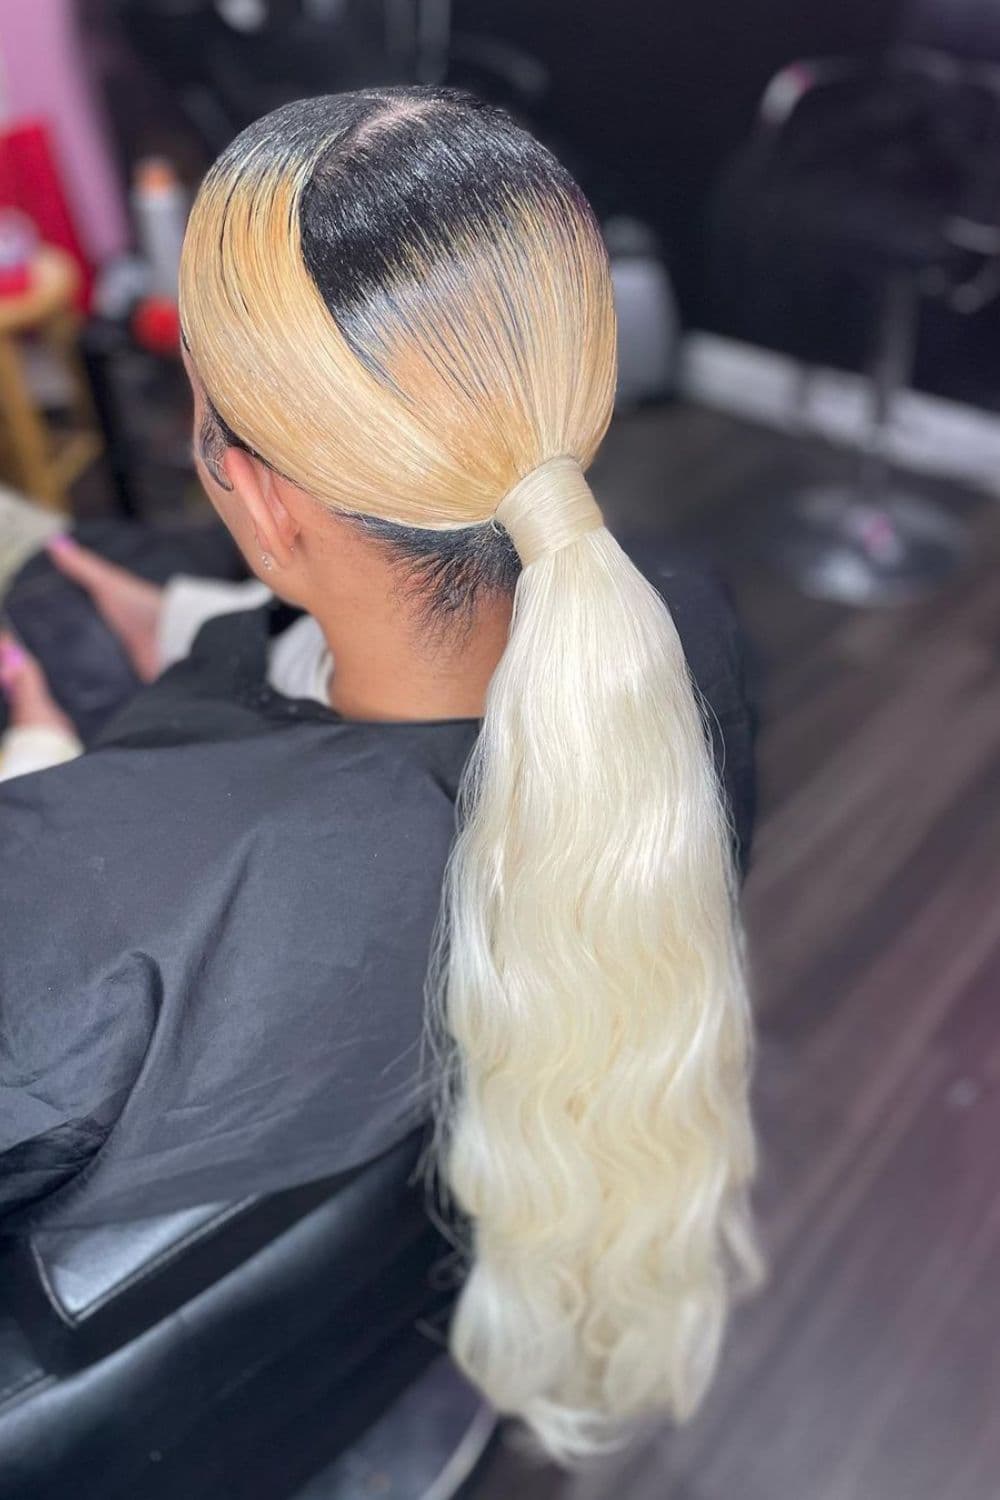 A woman sitting with a blonde sleek low ponytail.